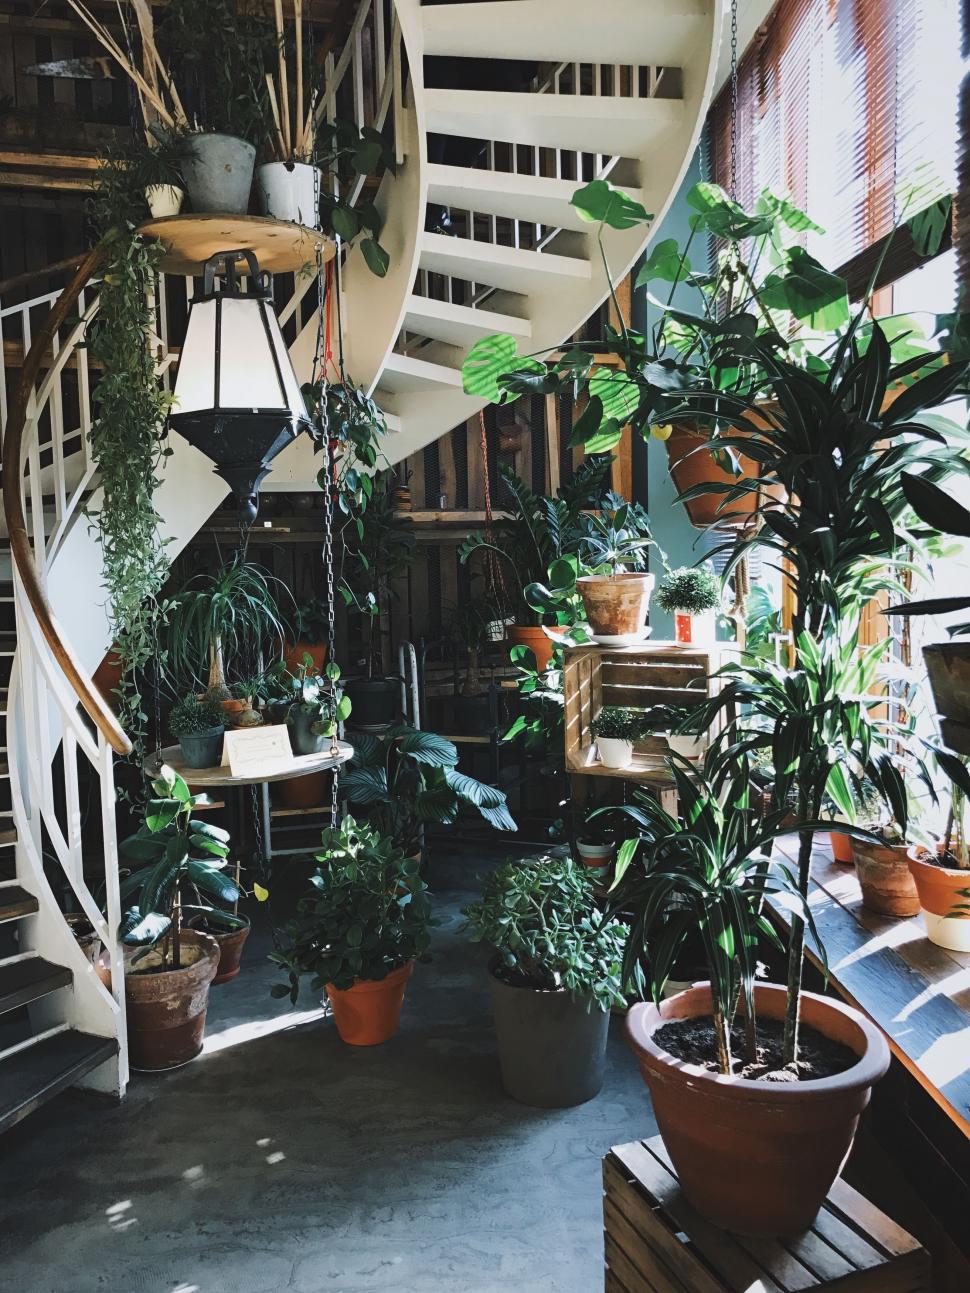 Free Image of Spiral Staircase in Building With Potted Plants 